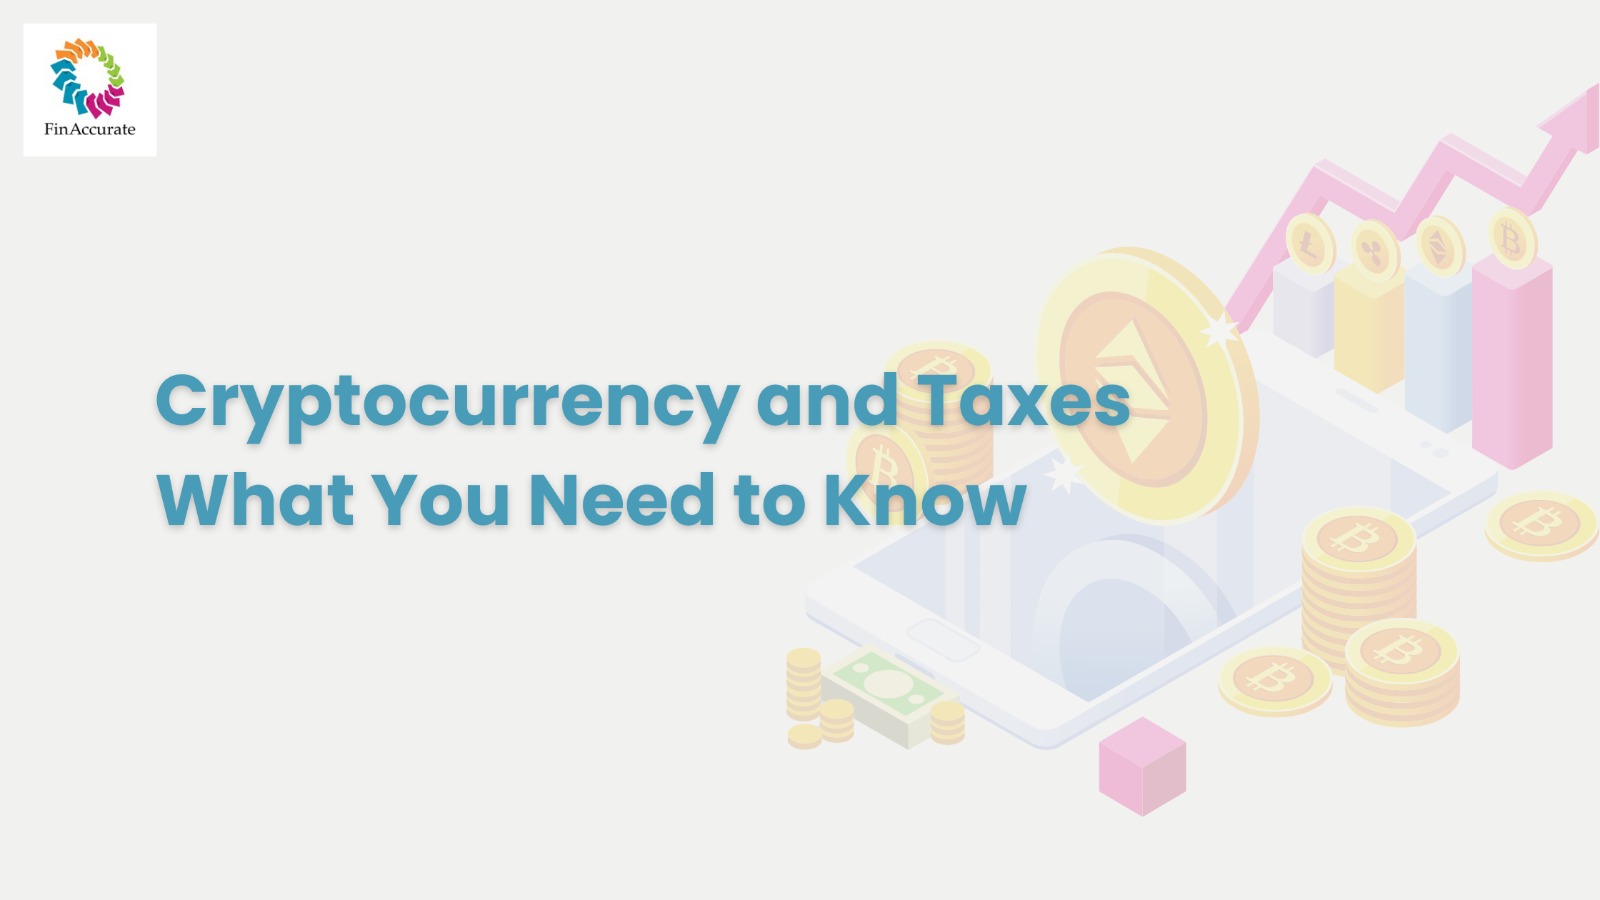 Cryptocurrency and Taxes : You need to know